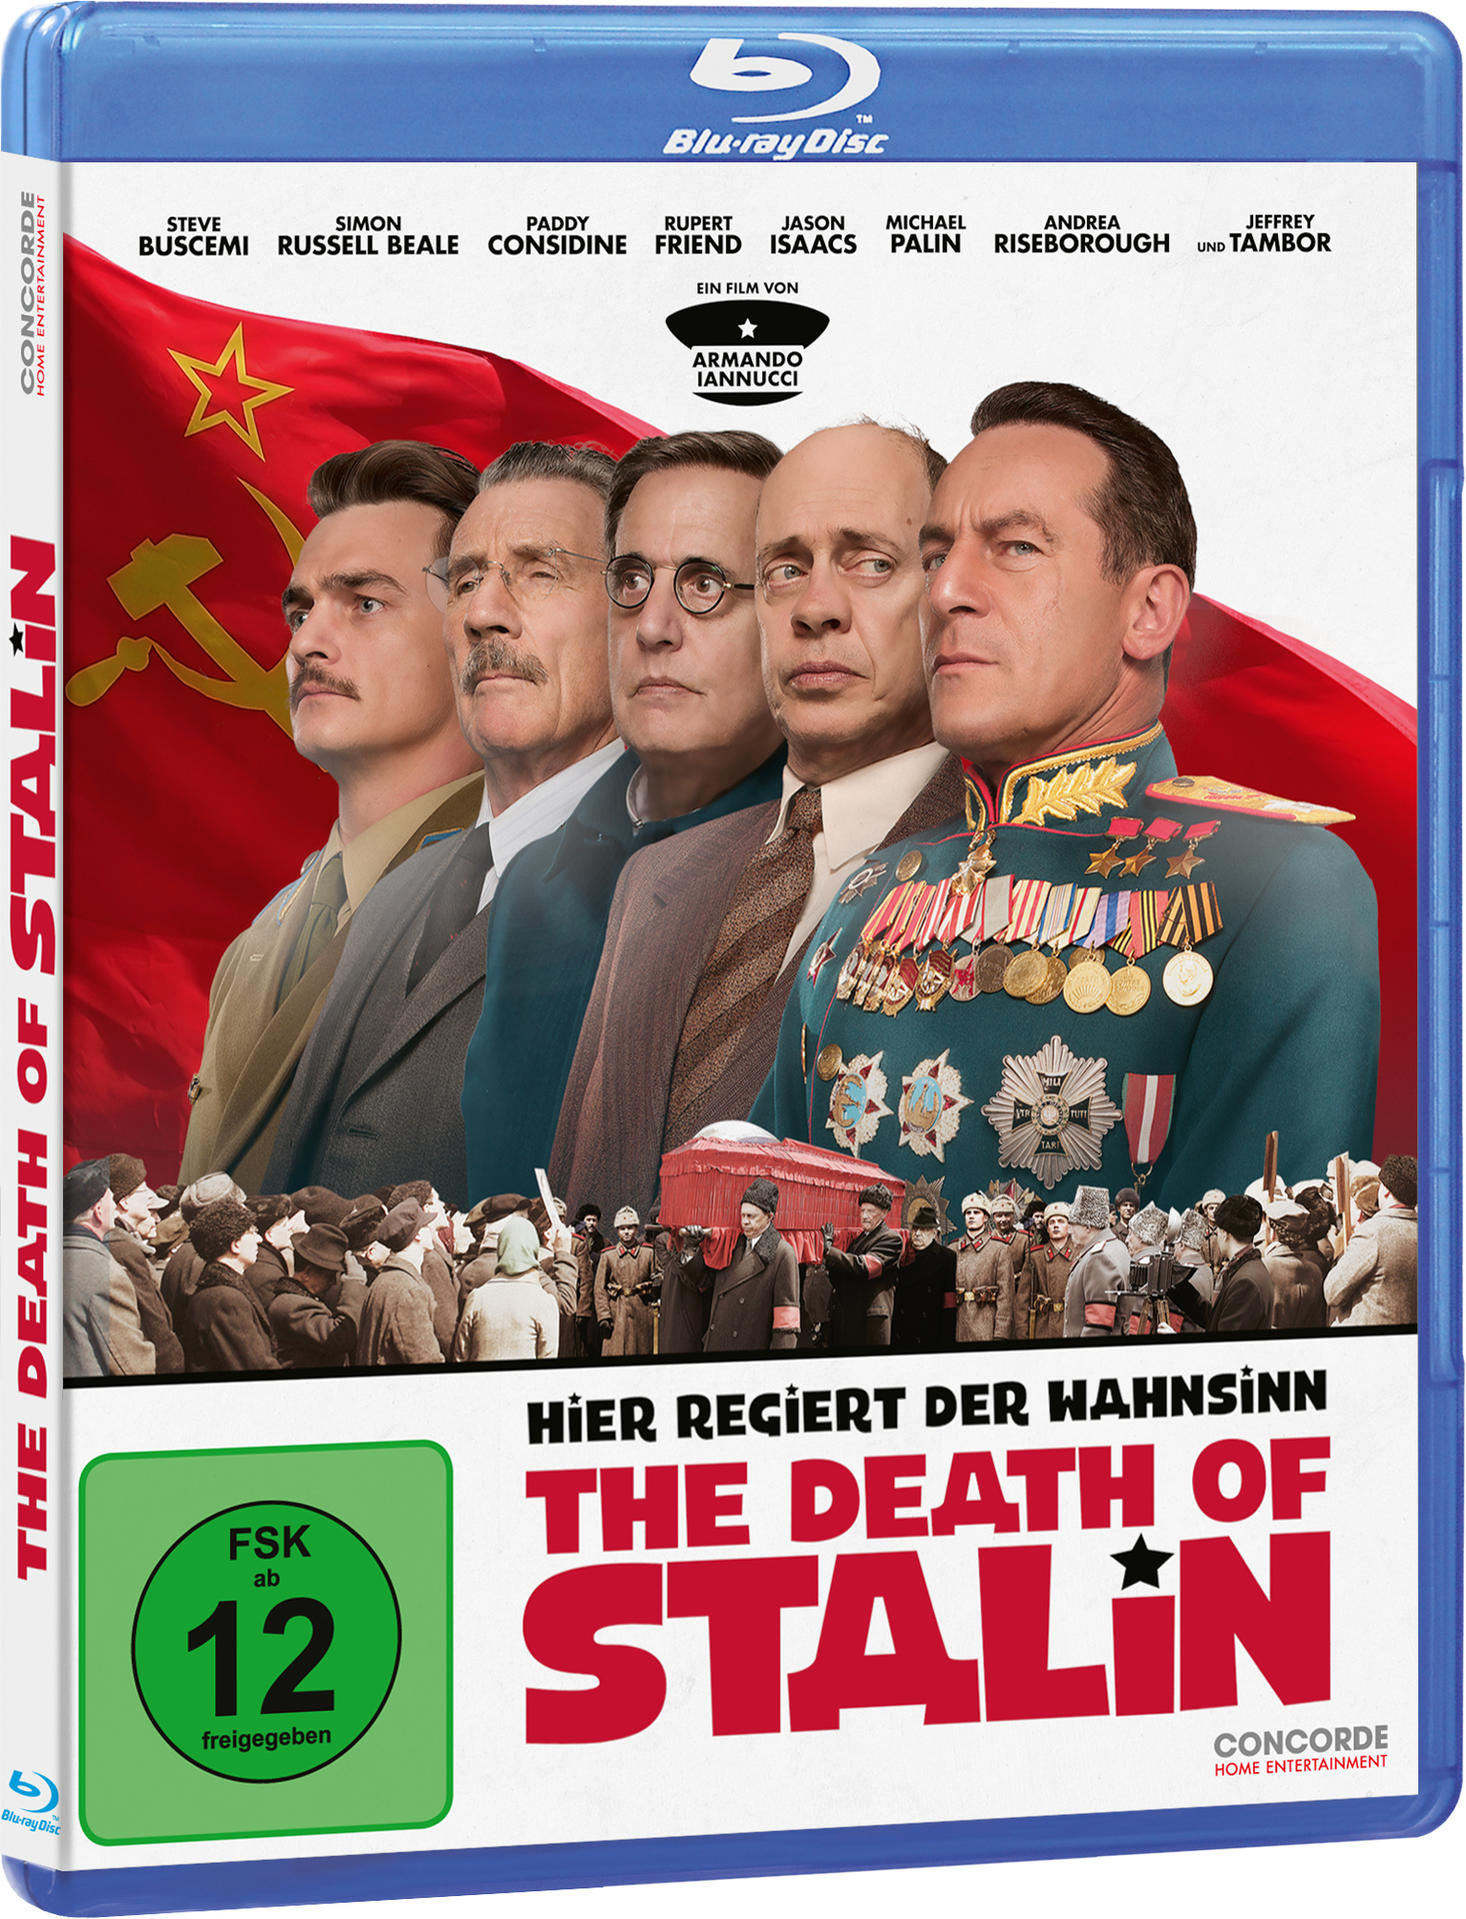 Stalin of Death Blu-ray The